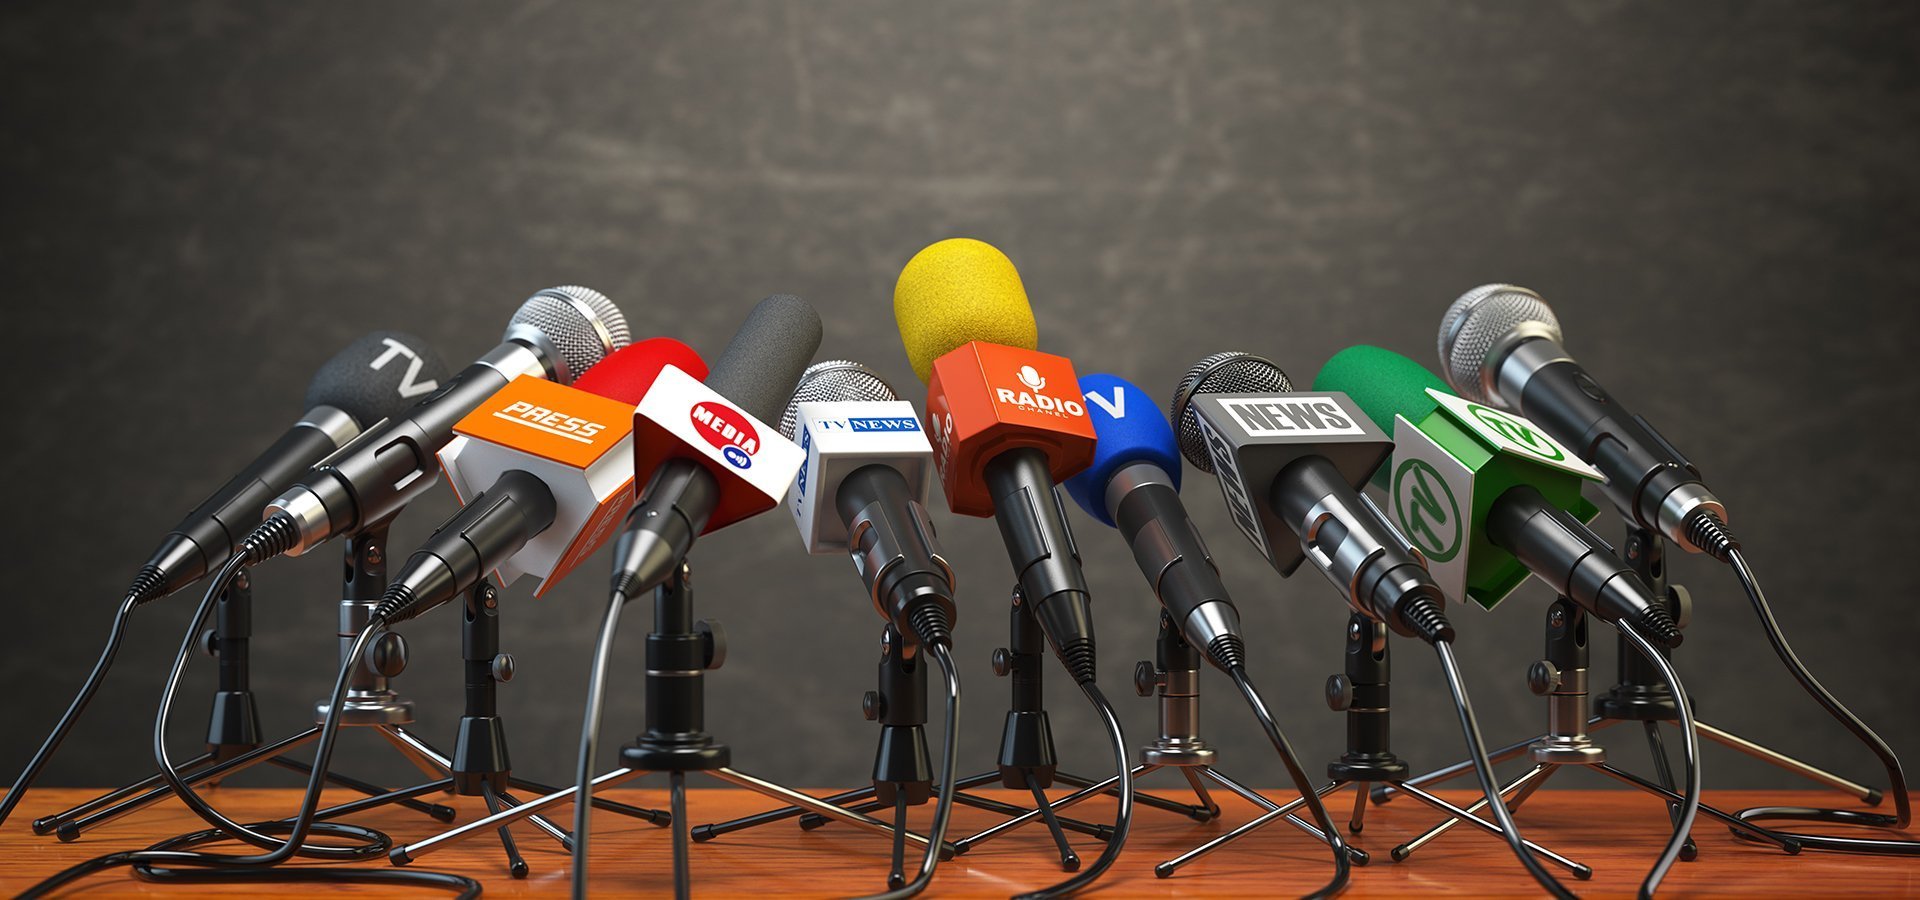 news mics await news about amatus health moving on from florida centers